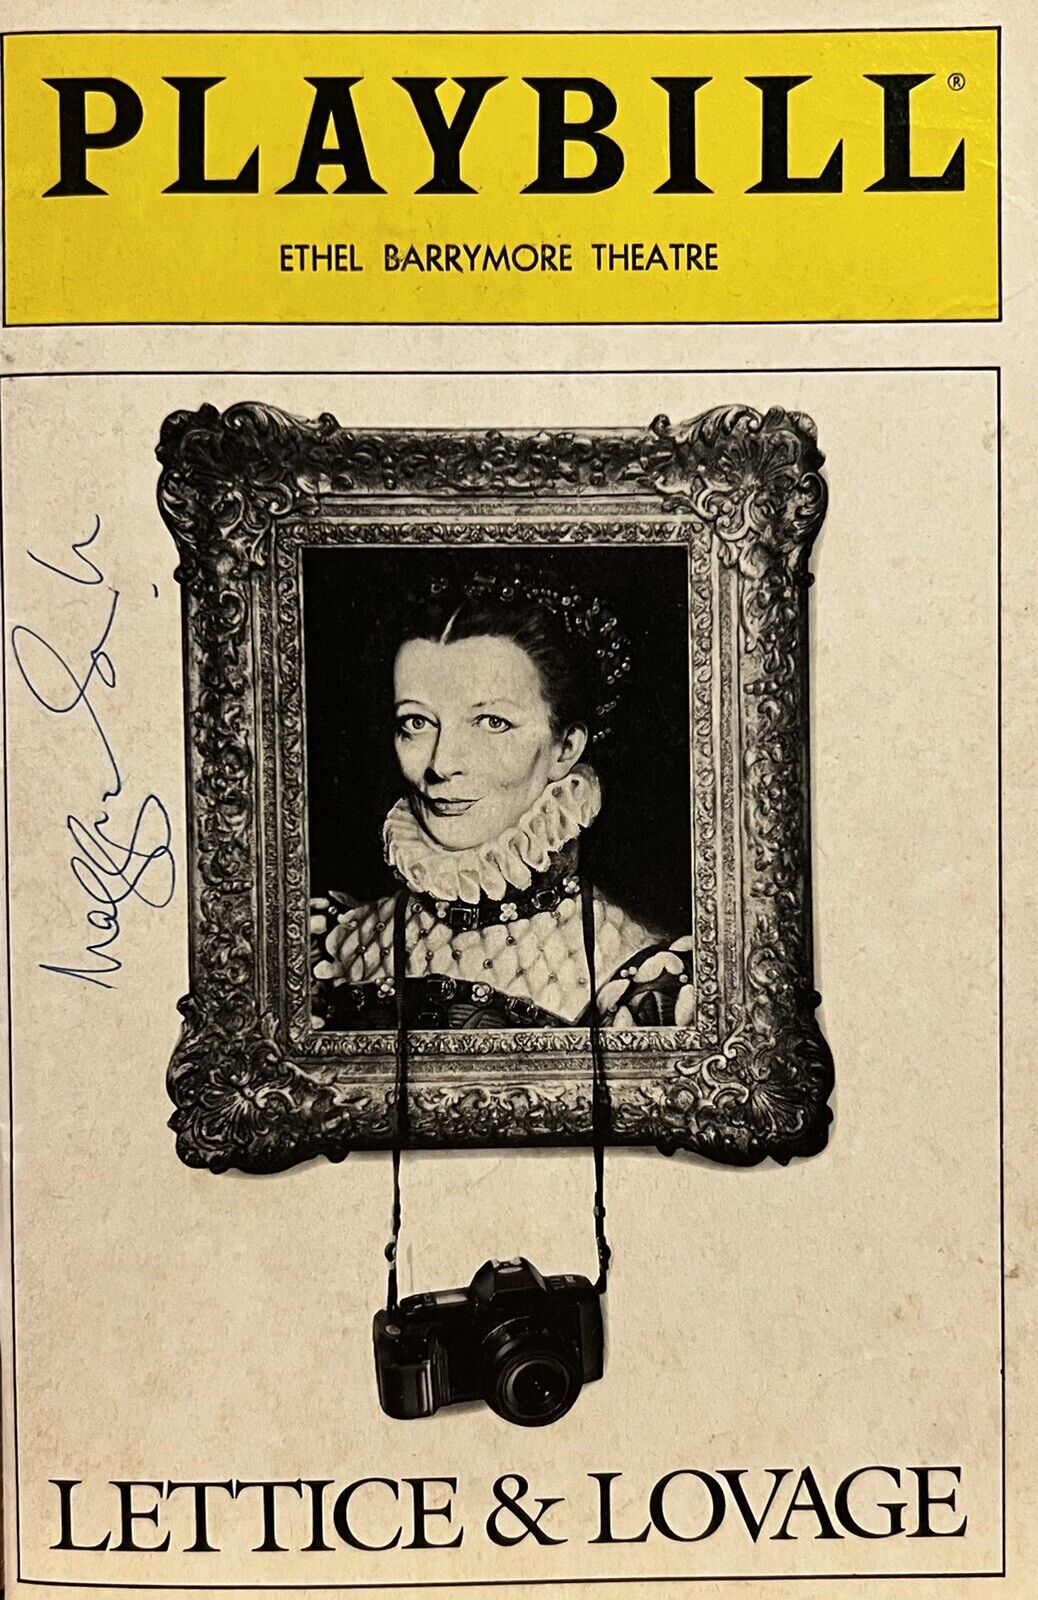 Maggie Smith Signed Lettice & Lovage Broadway Playbill Rare!